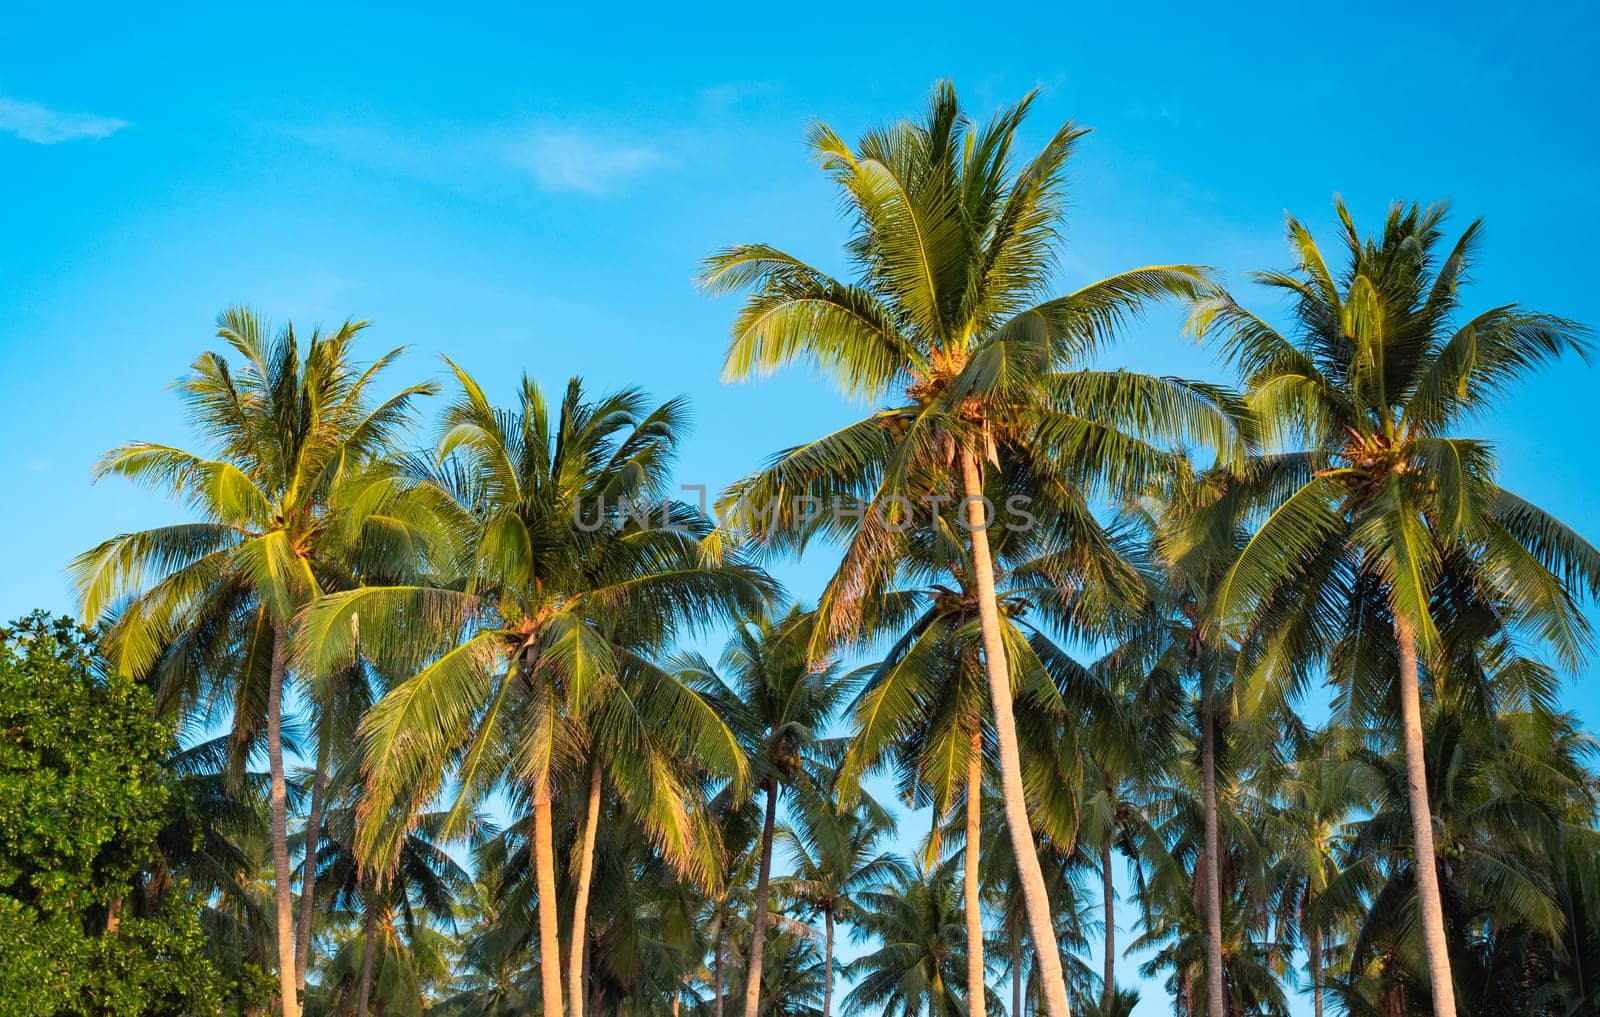 Bottom view of coconut palm trees forest in sunshine. Palm trees against a beautiful blue sky. Green palm trees on blue sky background. Travel concept. by Busker